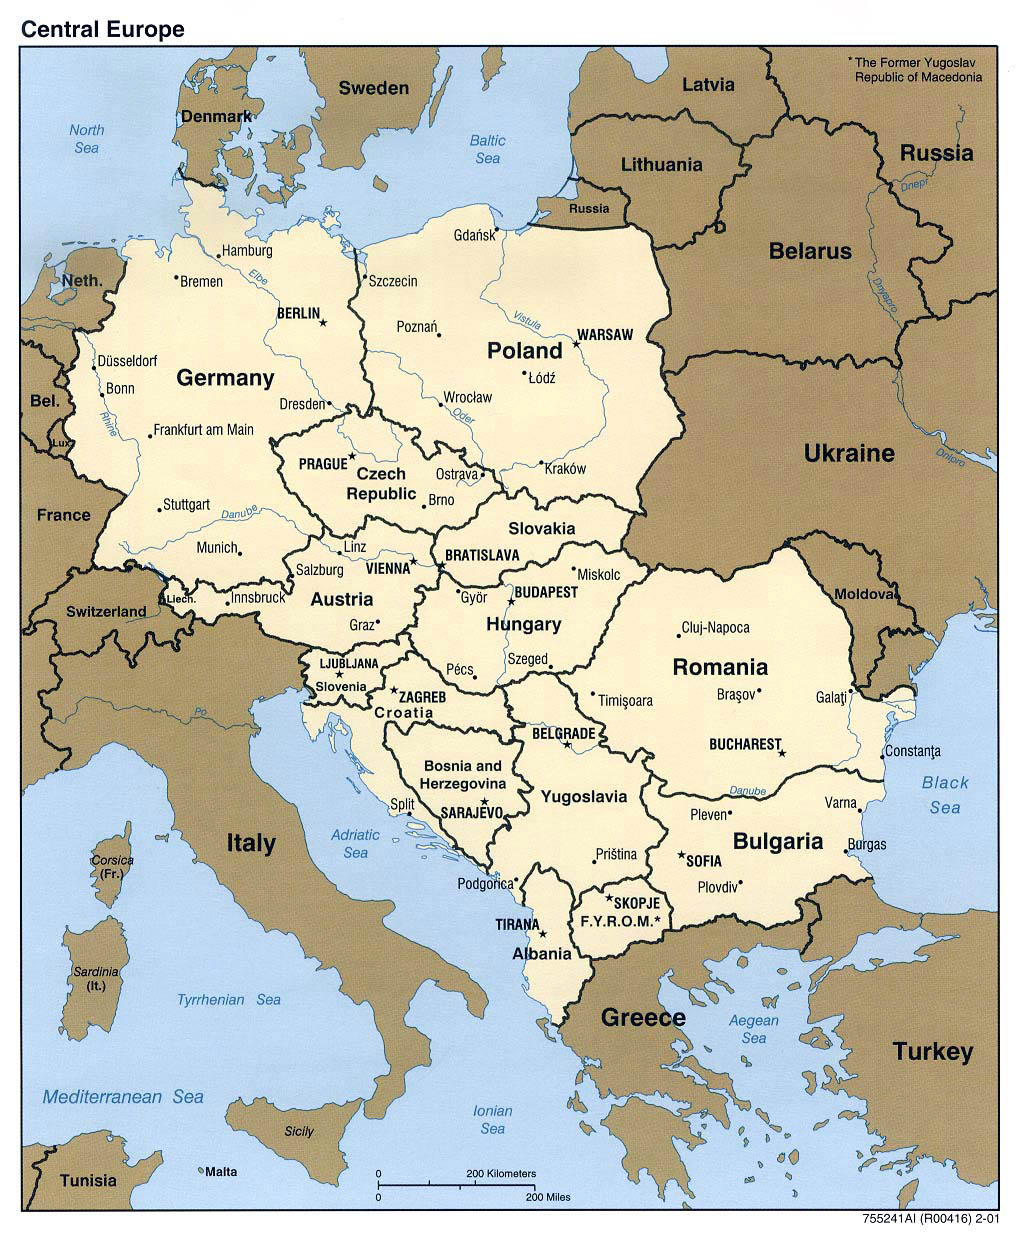 Detailed Political Map Of Central Europe 2001 Central Europe